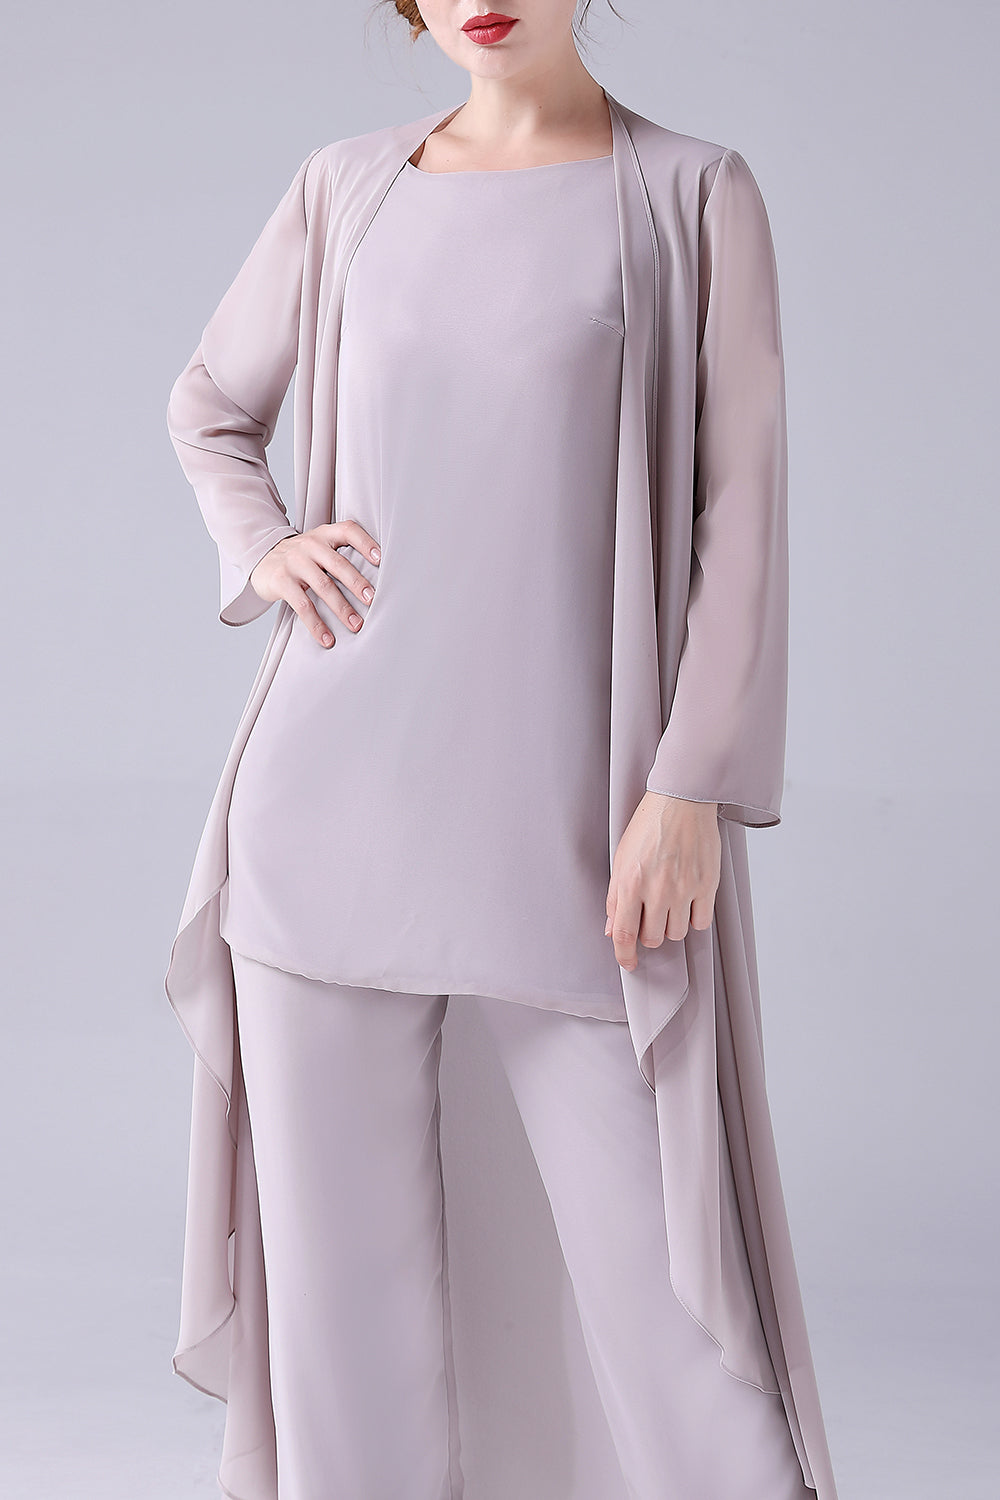 Apricot Long Sleeves 3 Pieces Mother of the Bride Pant Suits